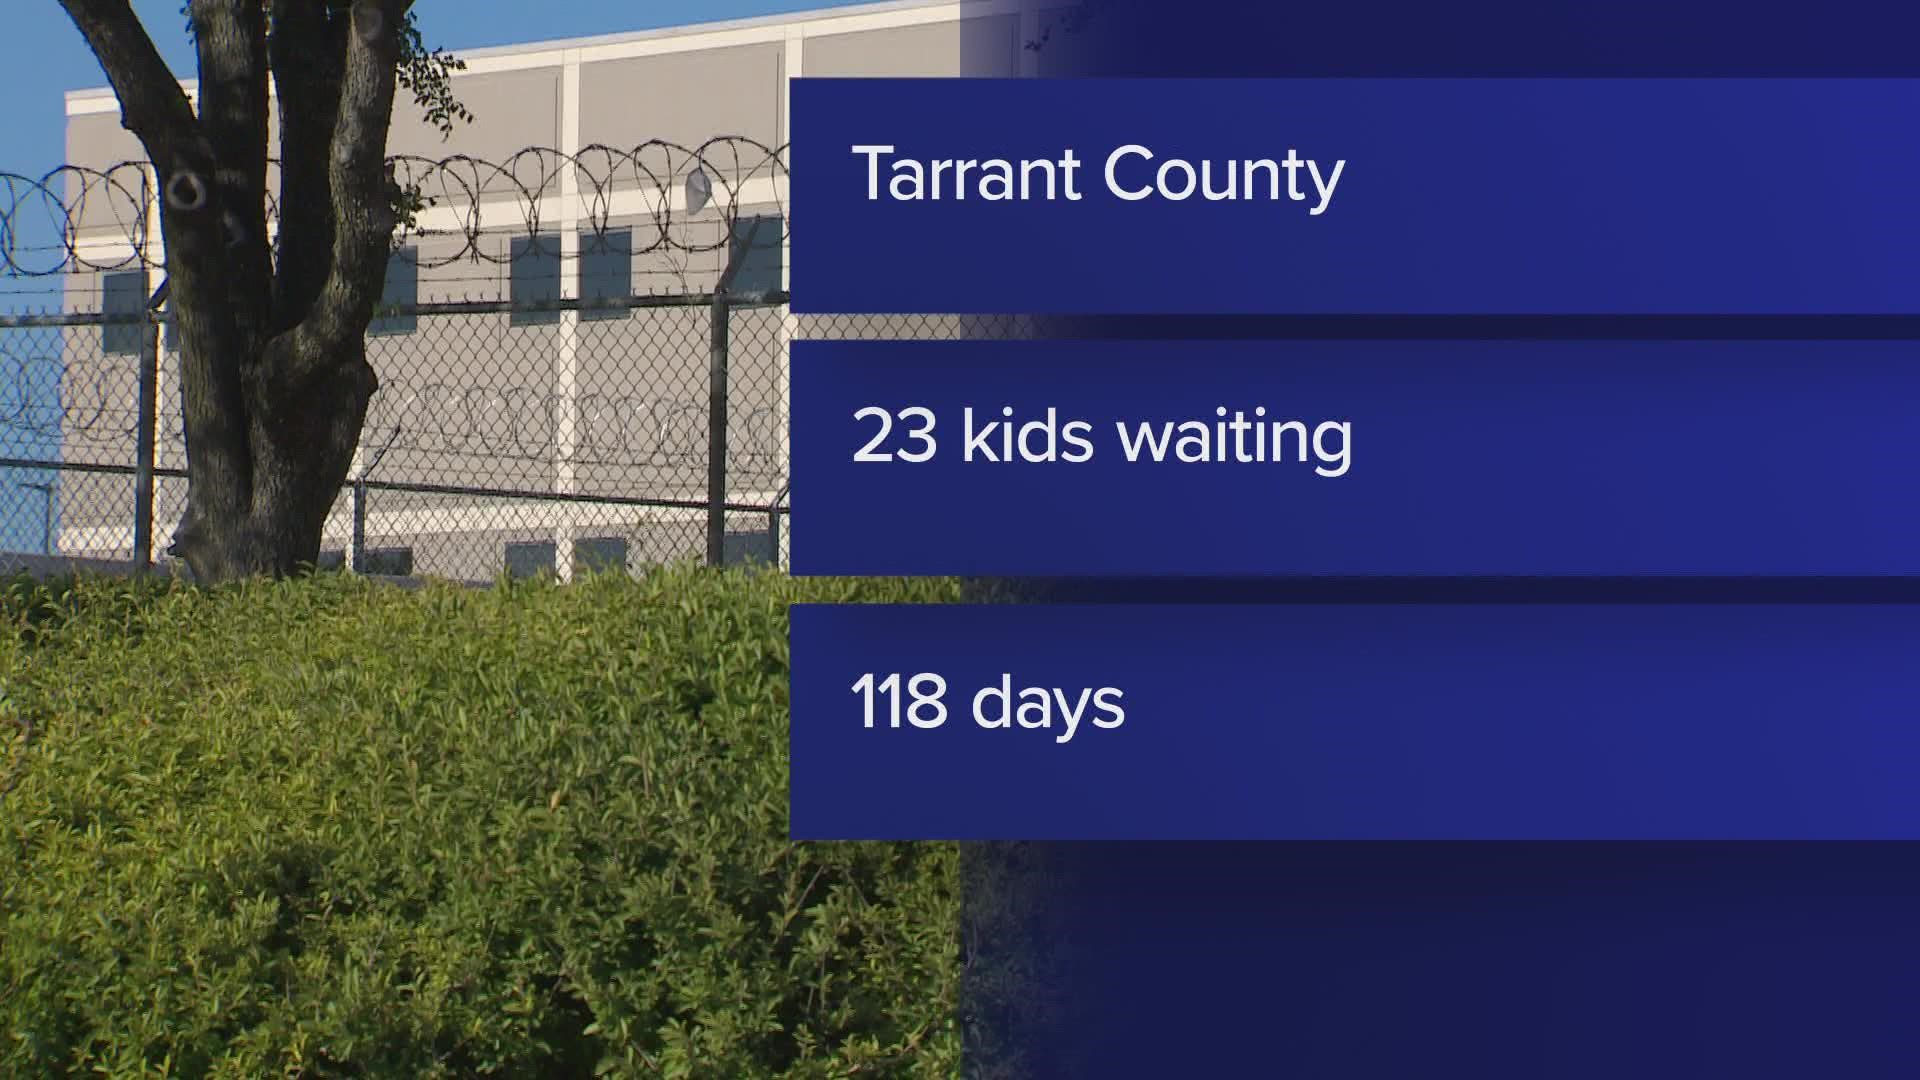 The Texas Juvenile Justice Department said that the state's juvenile detention facilities have stopped taking in youth due to critical shortages.